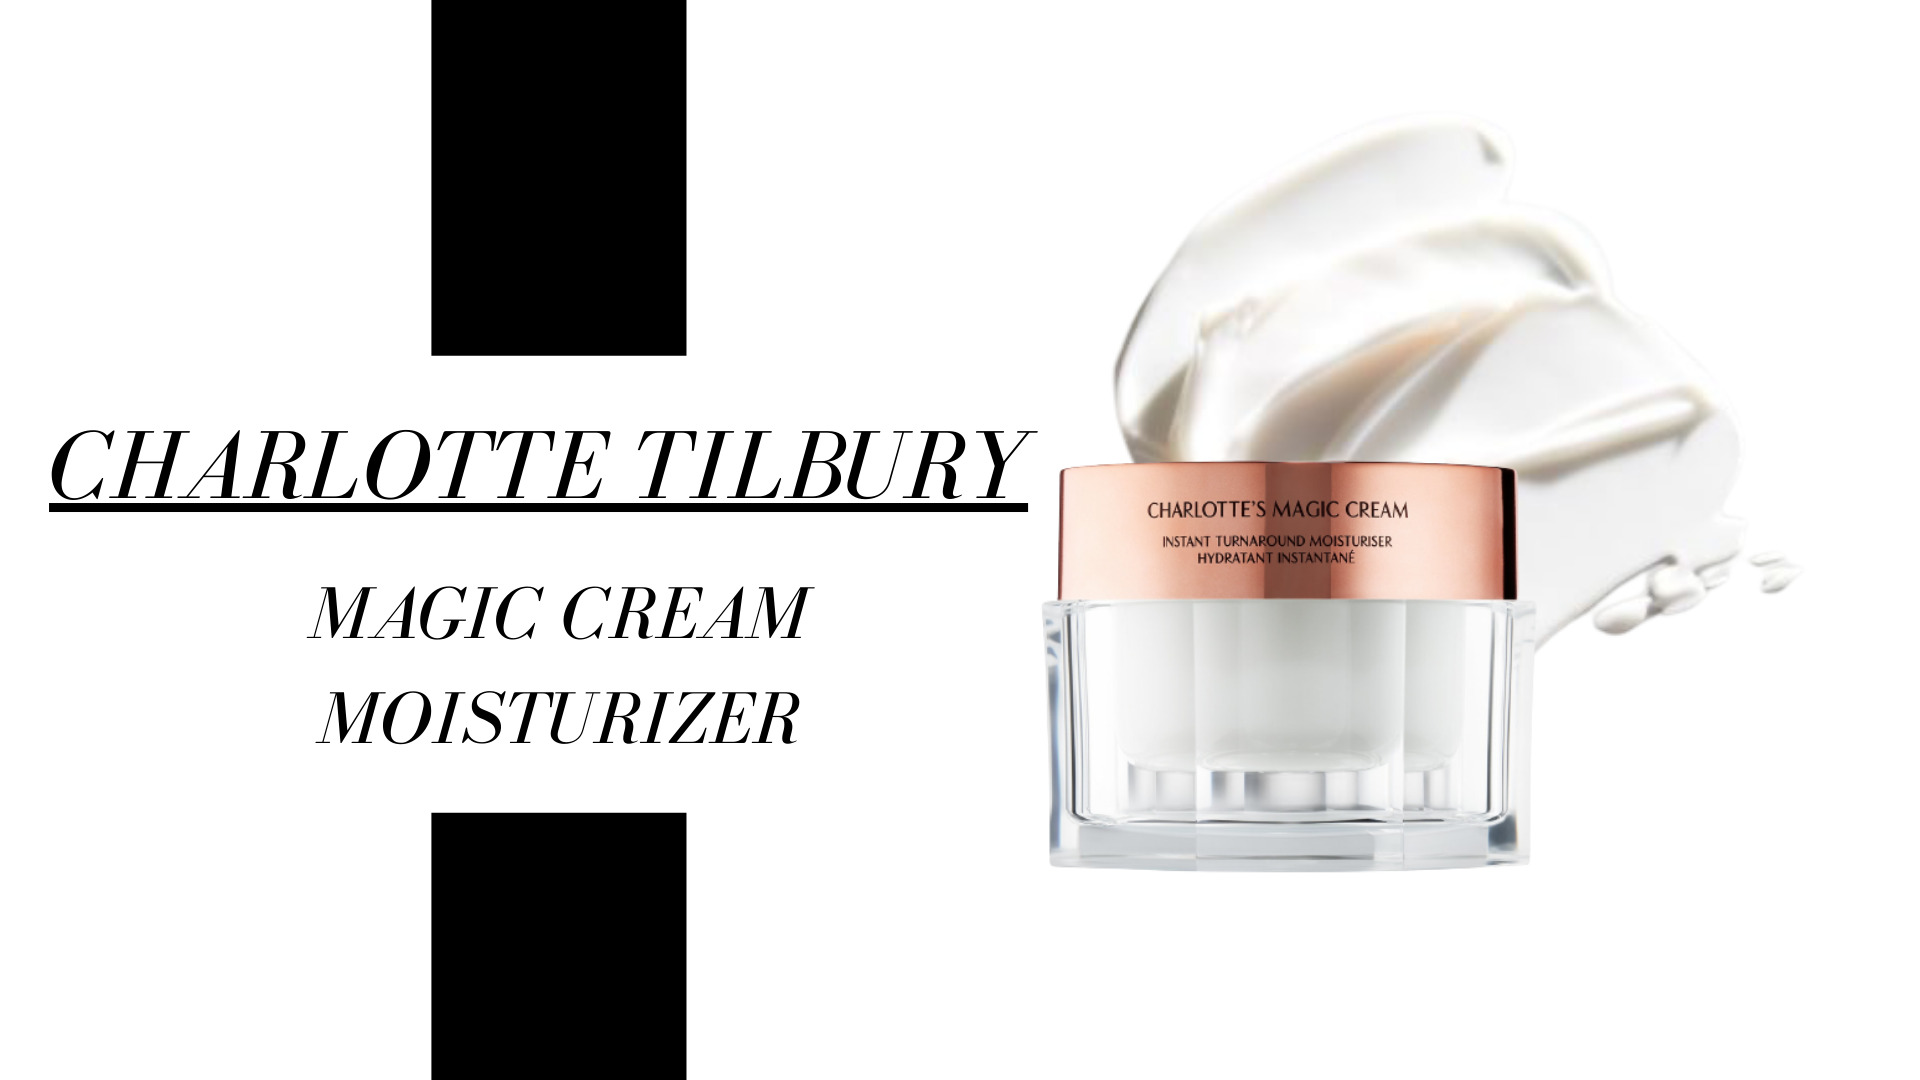 This Charlotte Tilbury product is, honestly, one of the best moisturizers in the market! It is super popular among influencers and makeup artists, and we can totally see why! The super-rich formula truly makes this cream the best one.